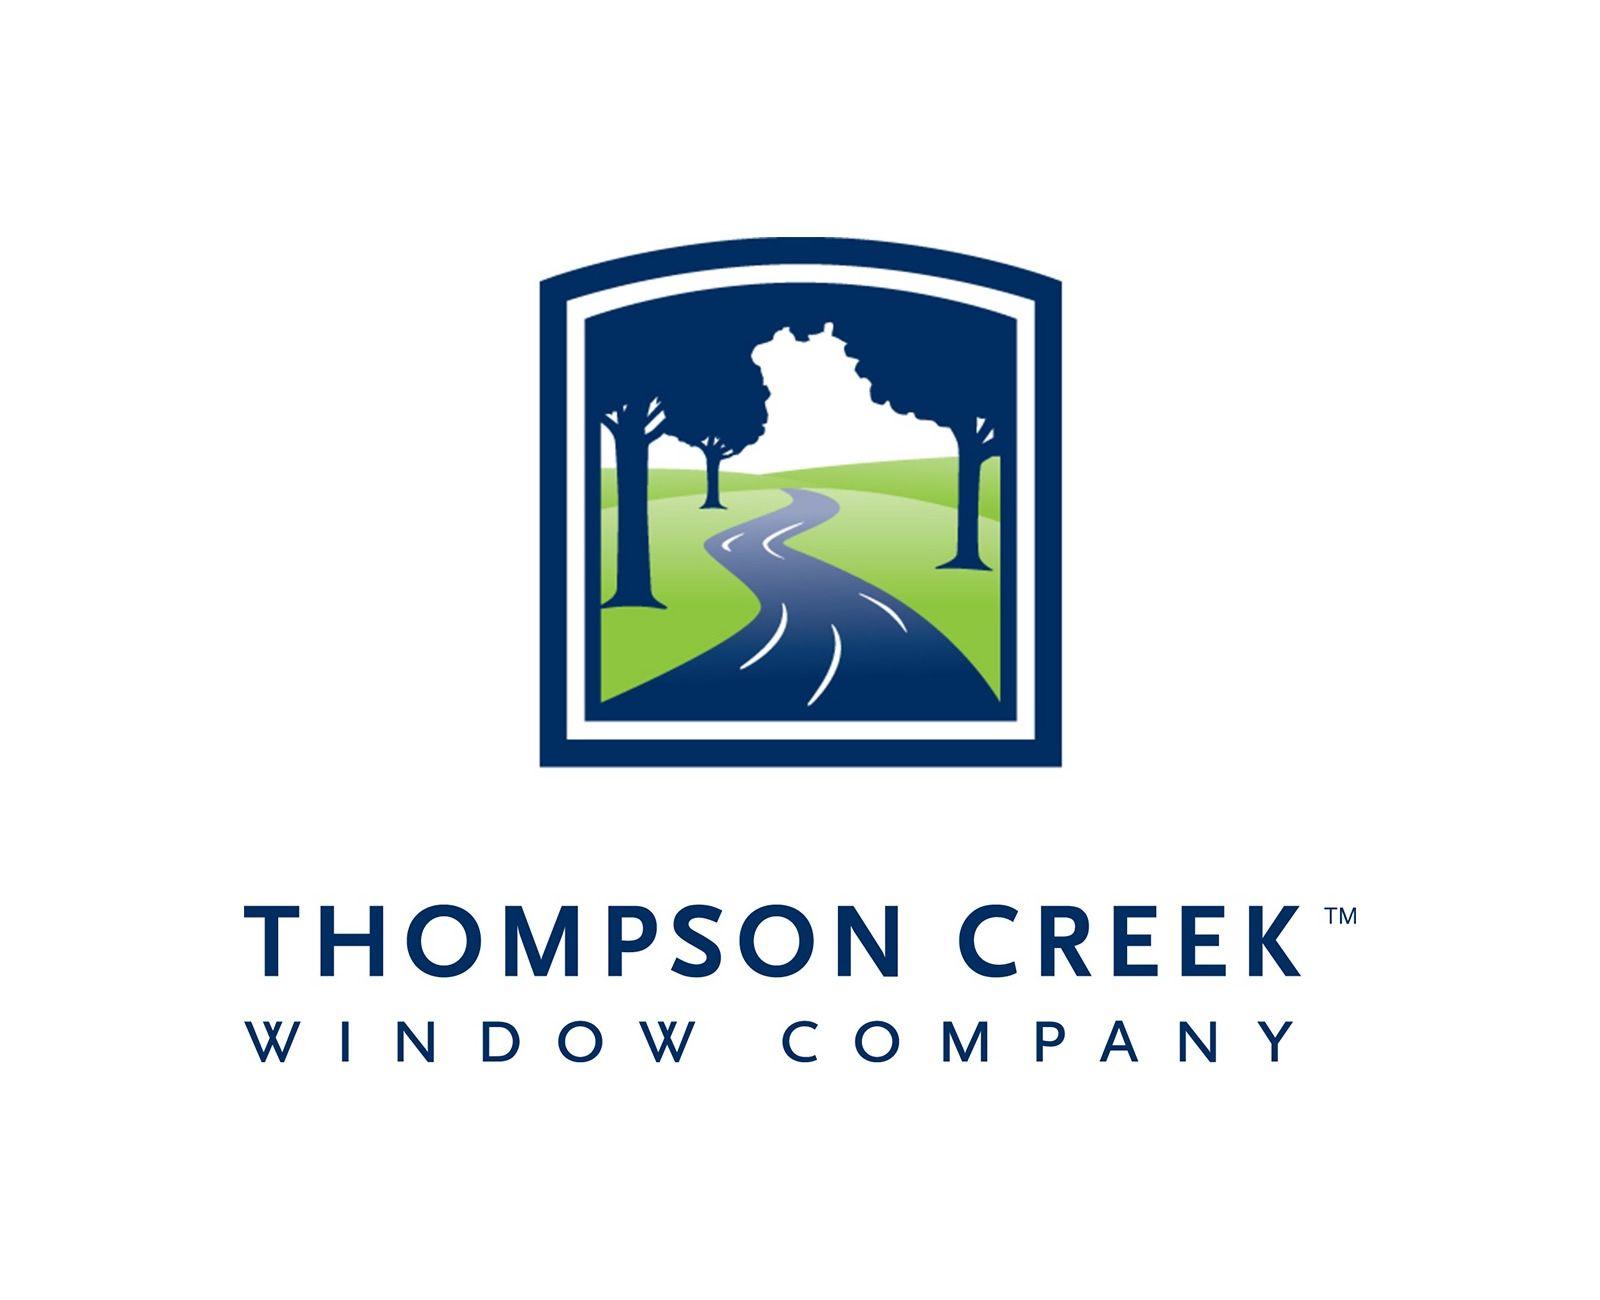 Sweet Windows Logo - Your Replacement Windows and Doors Company - Thompson Creek